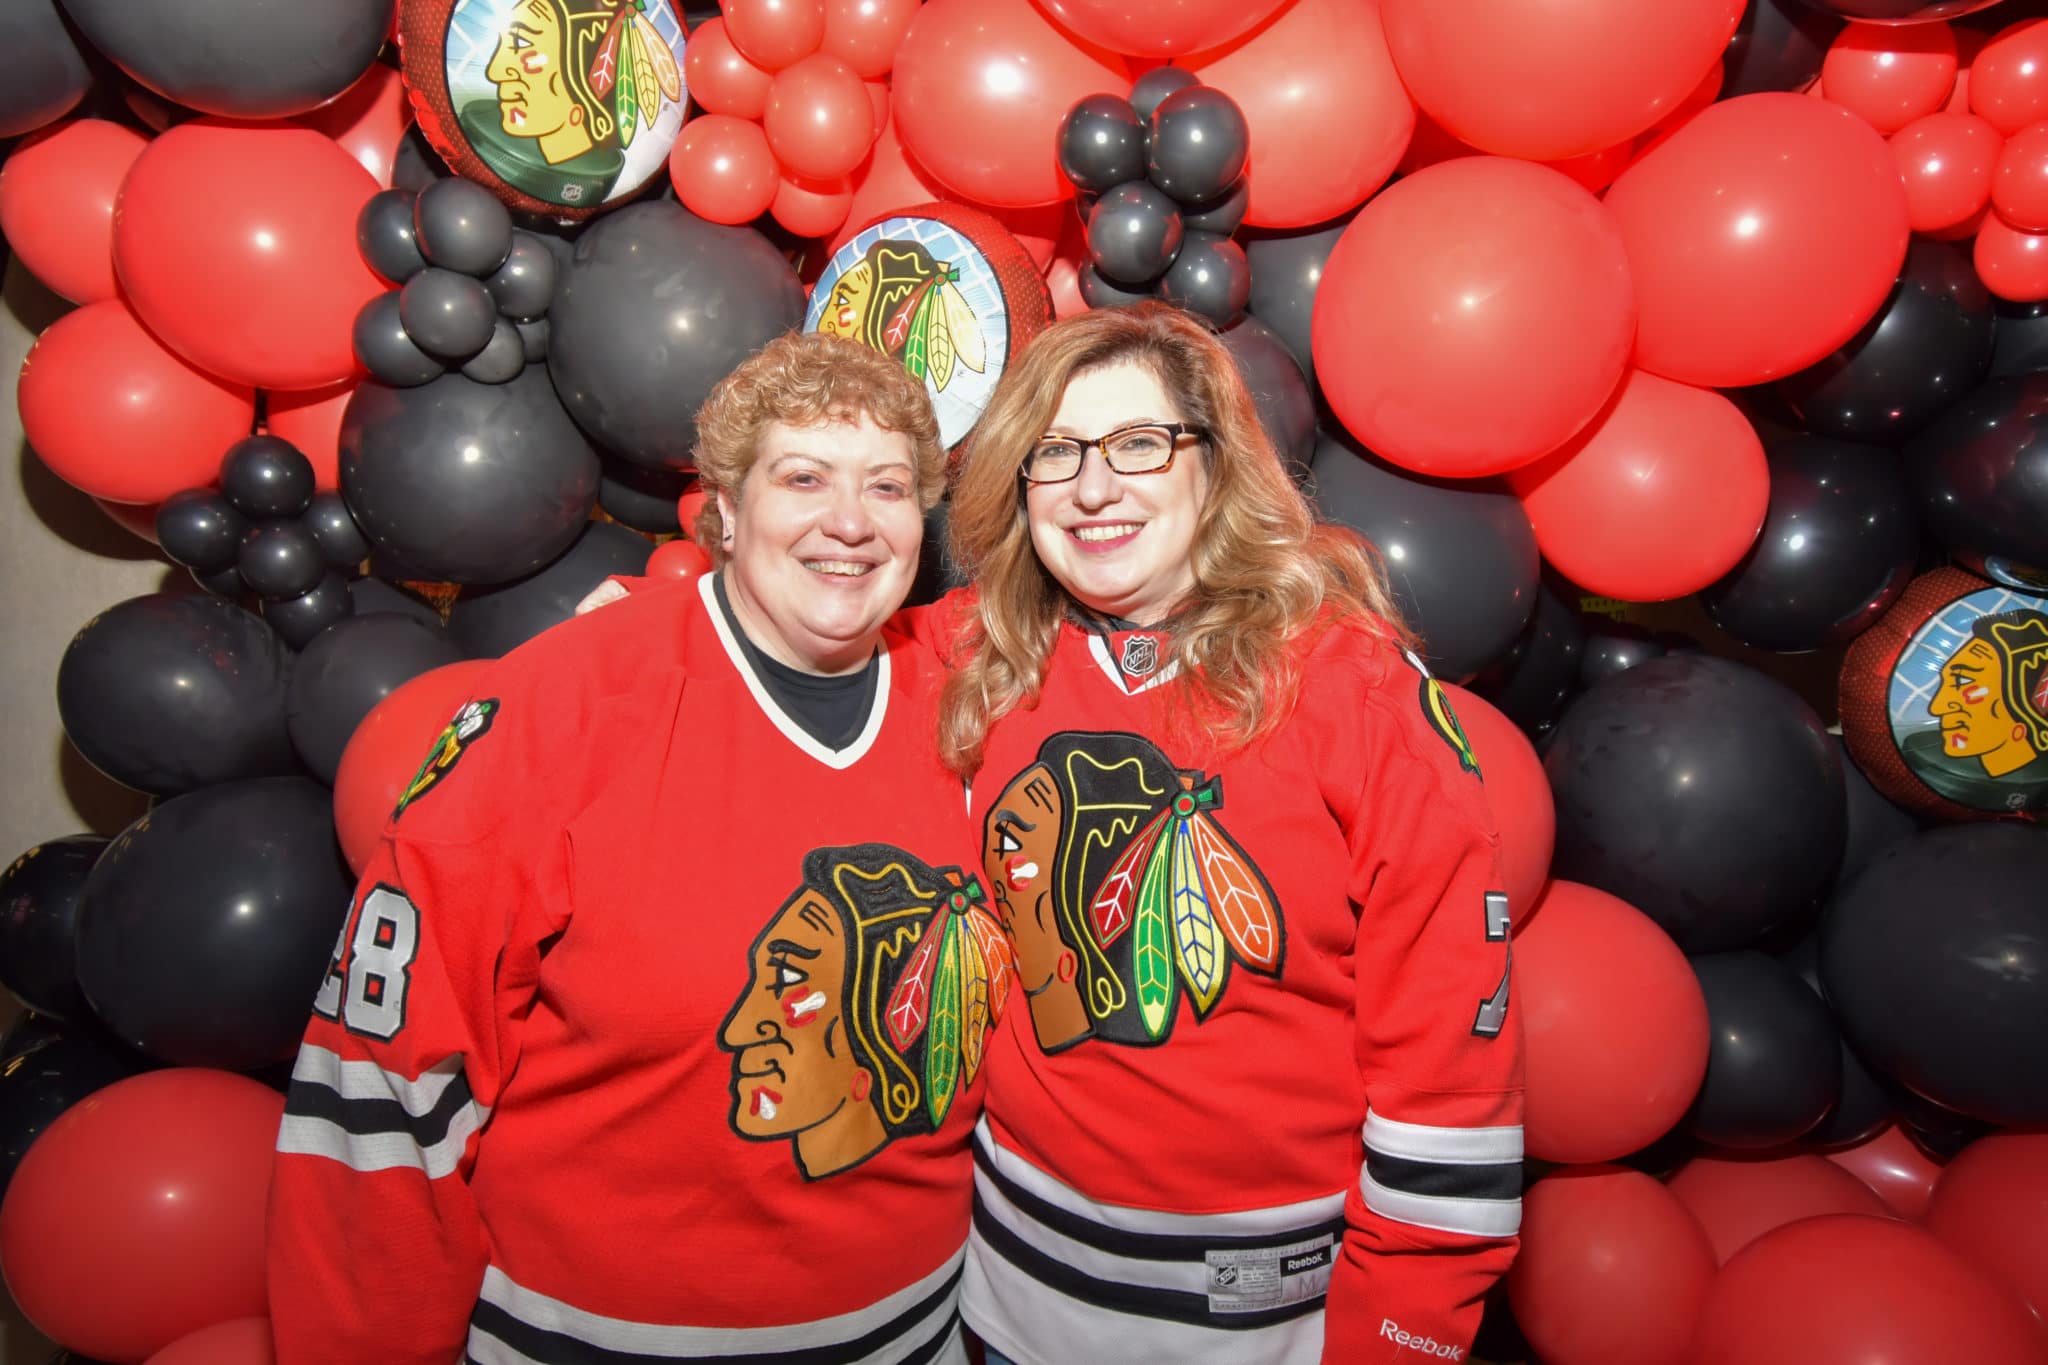 March 19 BHAWKS WATCH PARTY 37